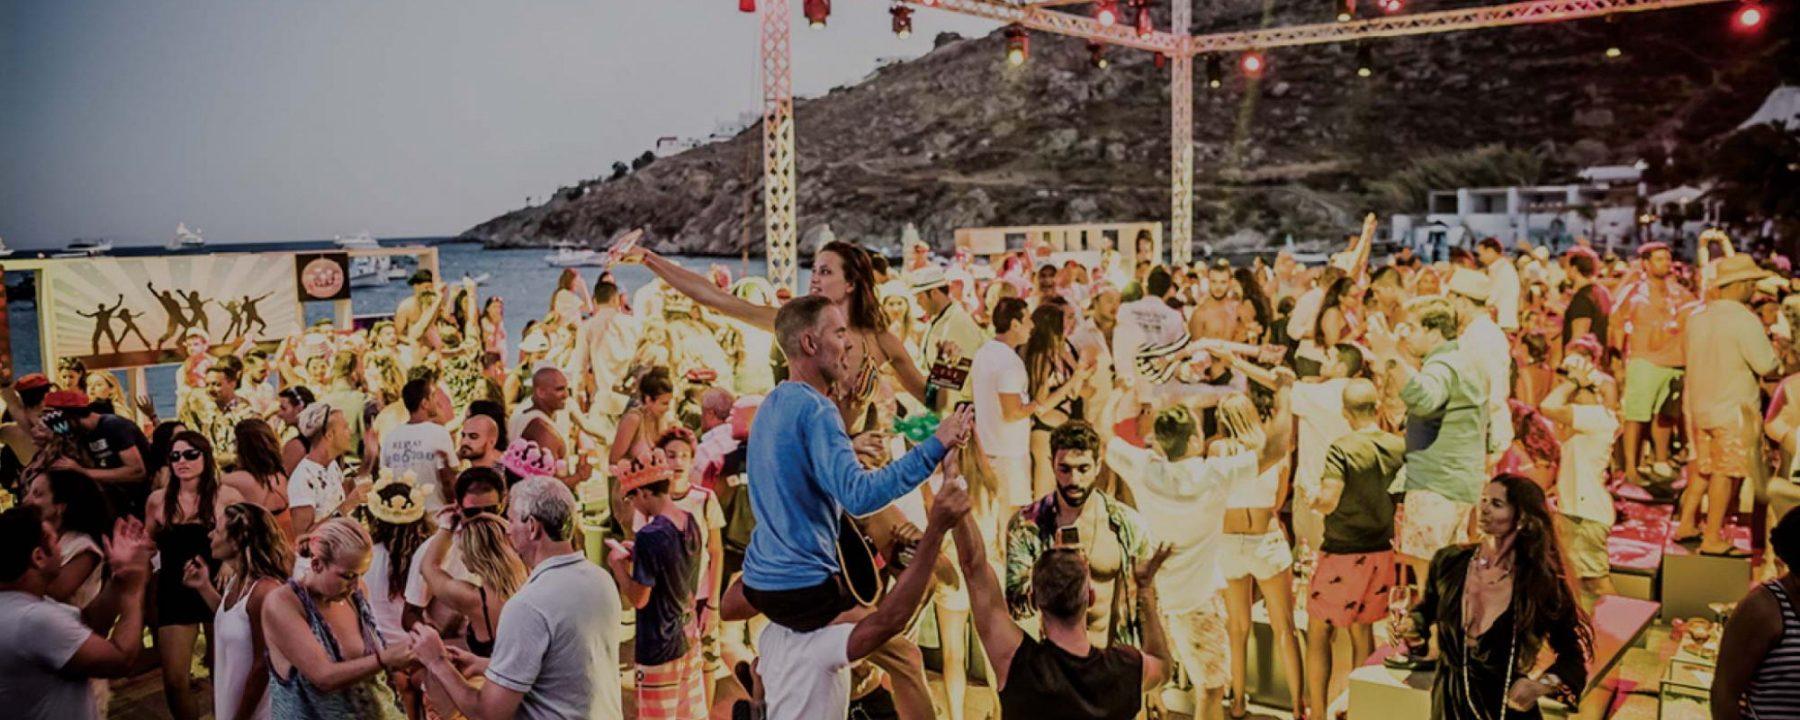 Mykonos Party / {the ultimate mykonos party guide}.